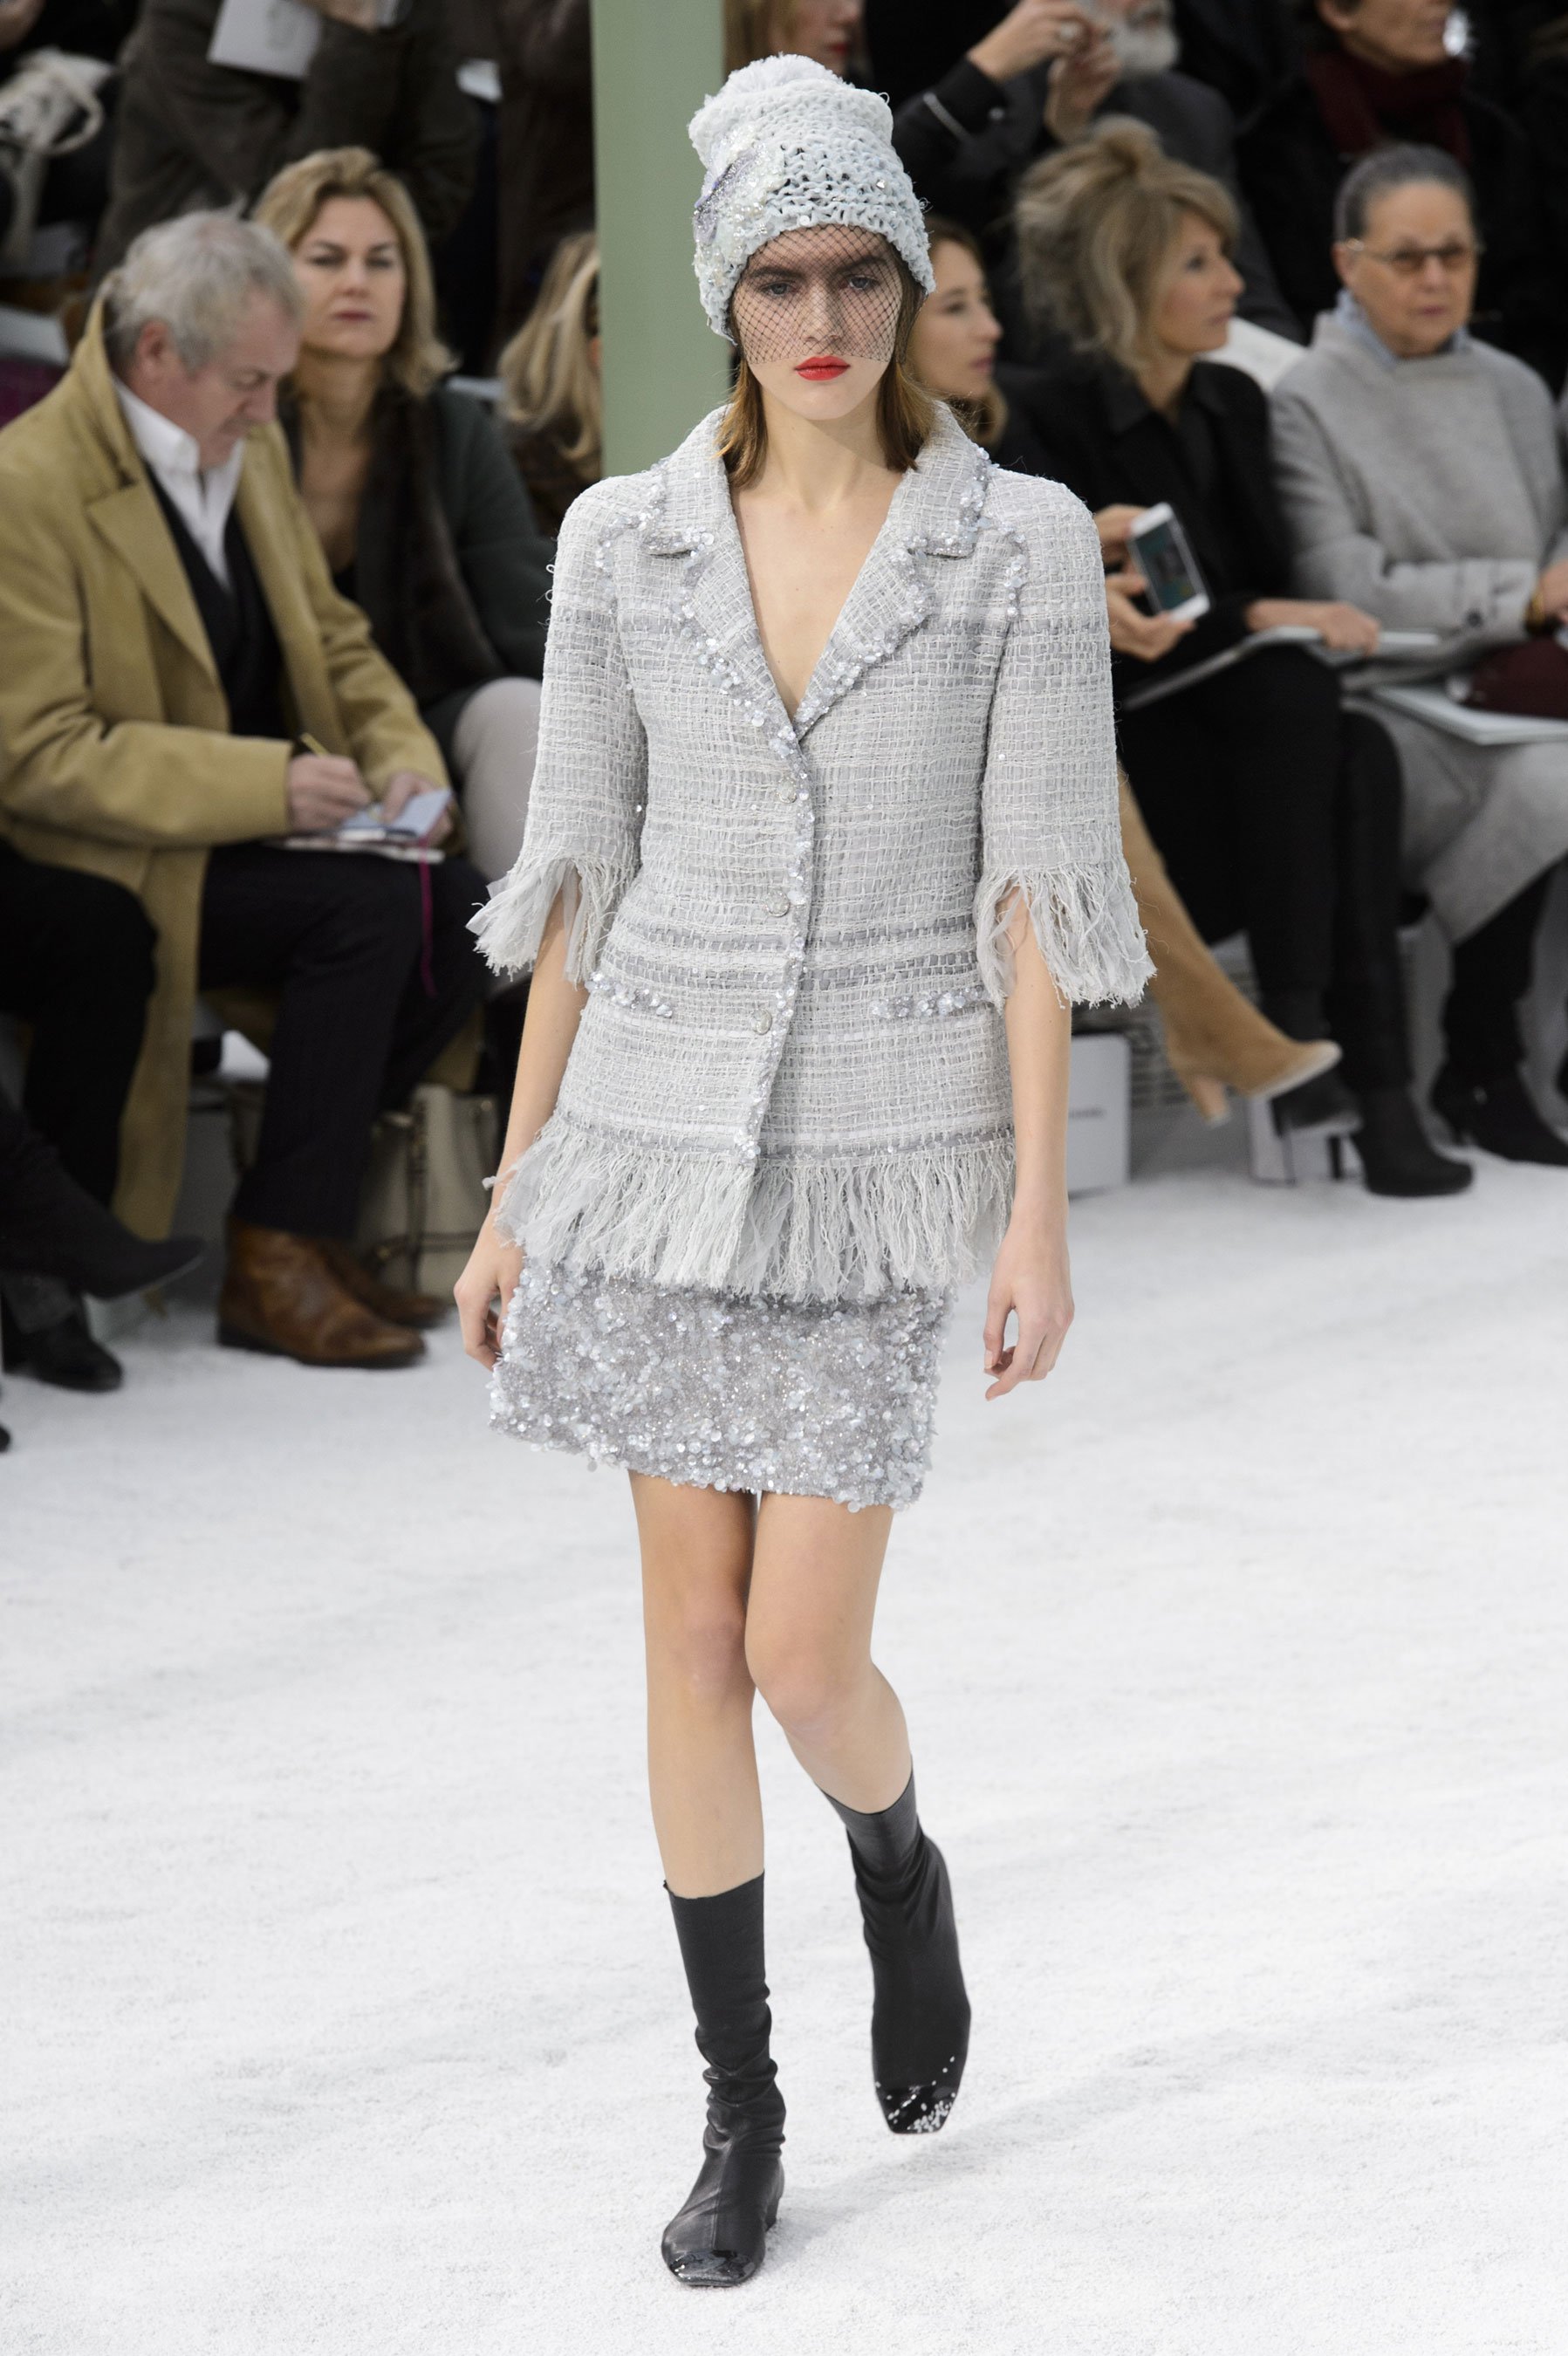 chanel haute couture spring 2015 pfw 29 valery